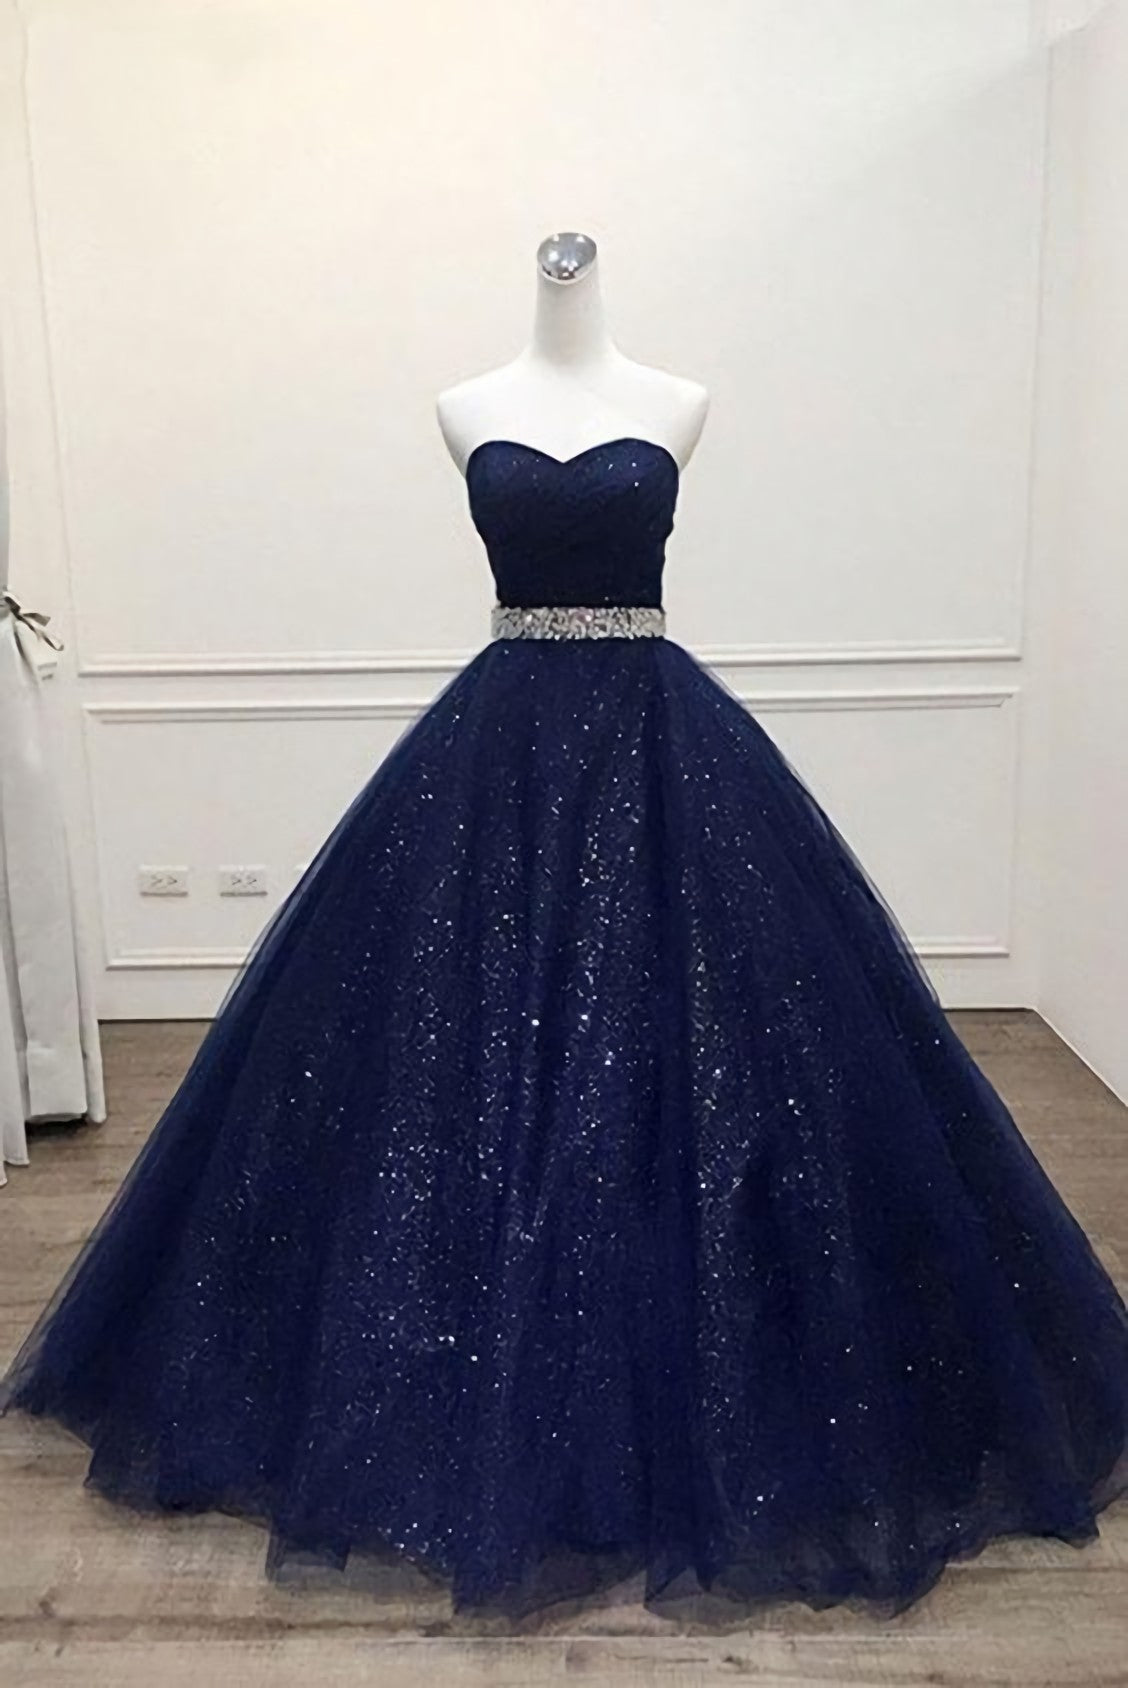 Ong Navy Blue Sparkle Sweetheart Tulle Corset Prom Dress, With Beading Belt outfits, Homecoming Dresses Online